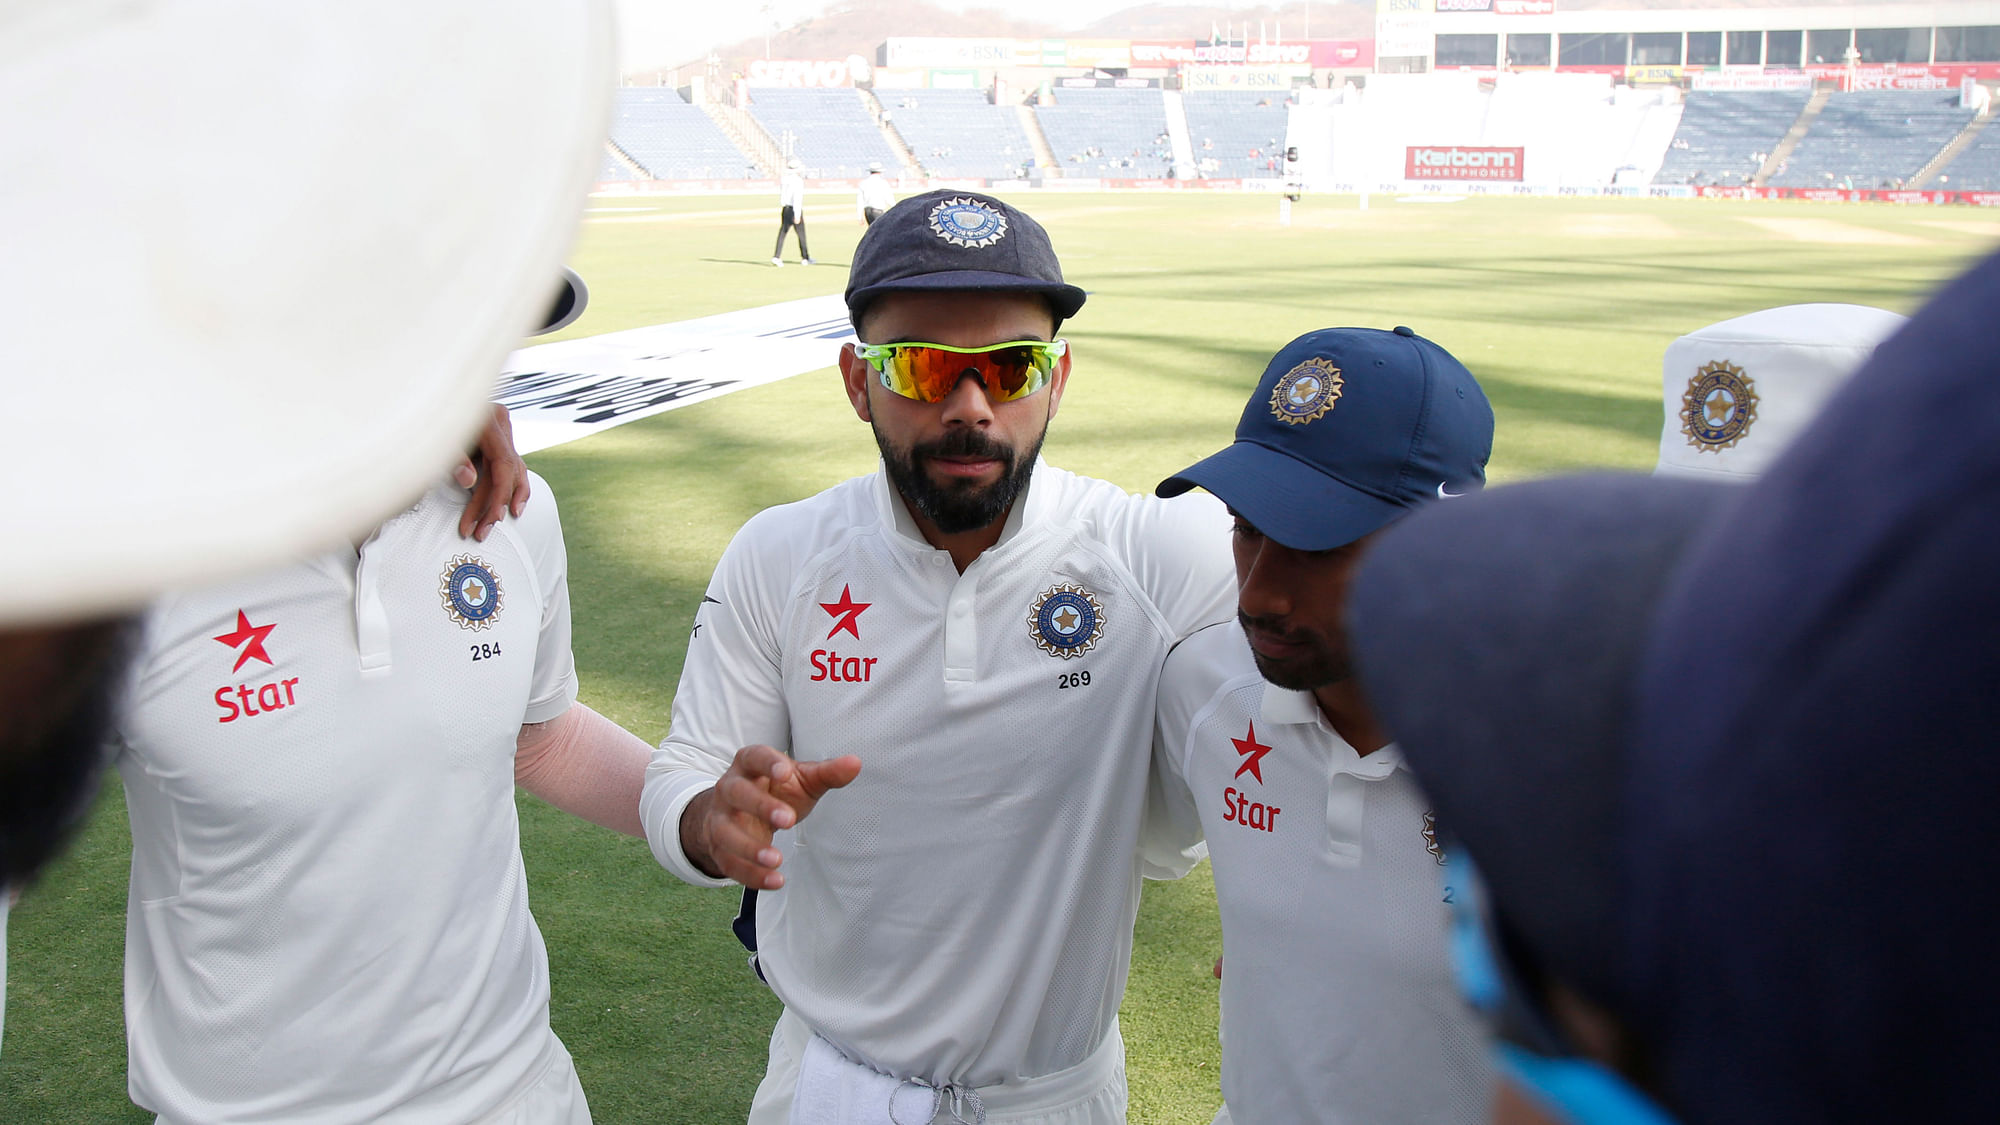 Virat Kohli will be leading India in his first England tour as captain starting 1 August.